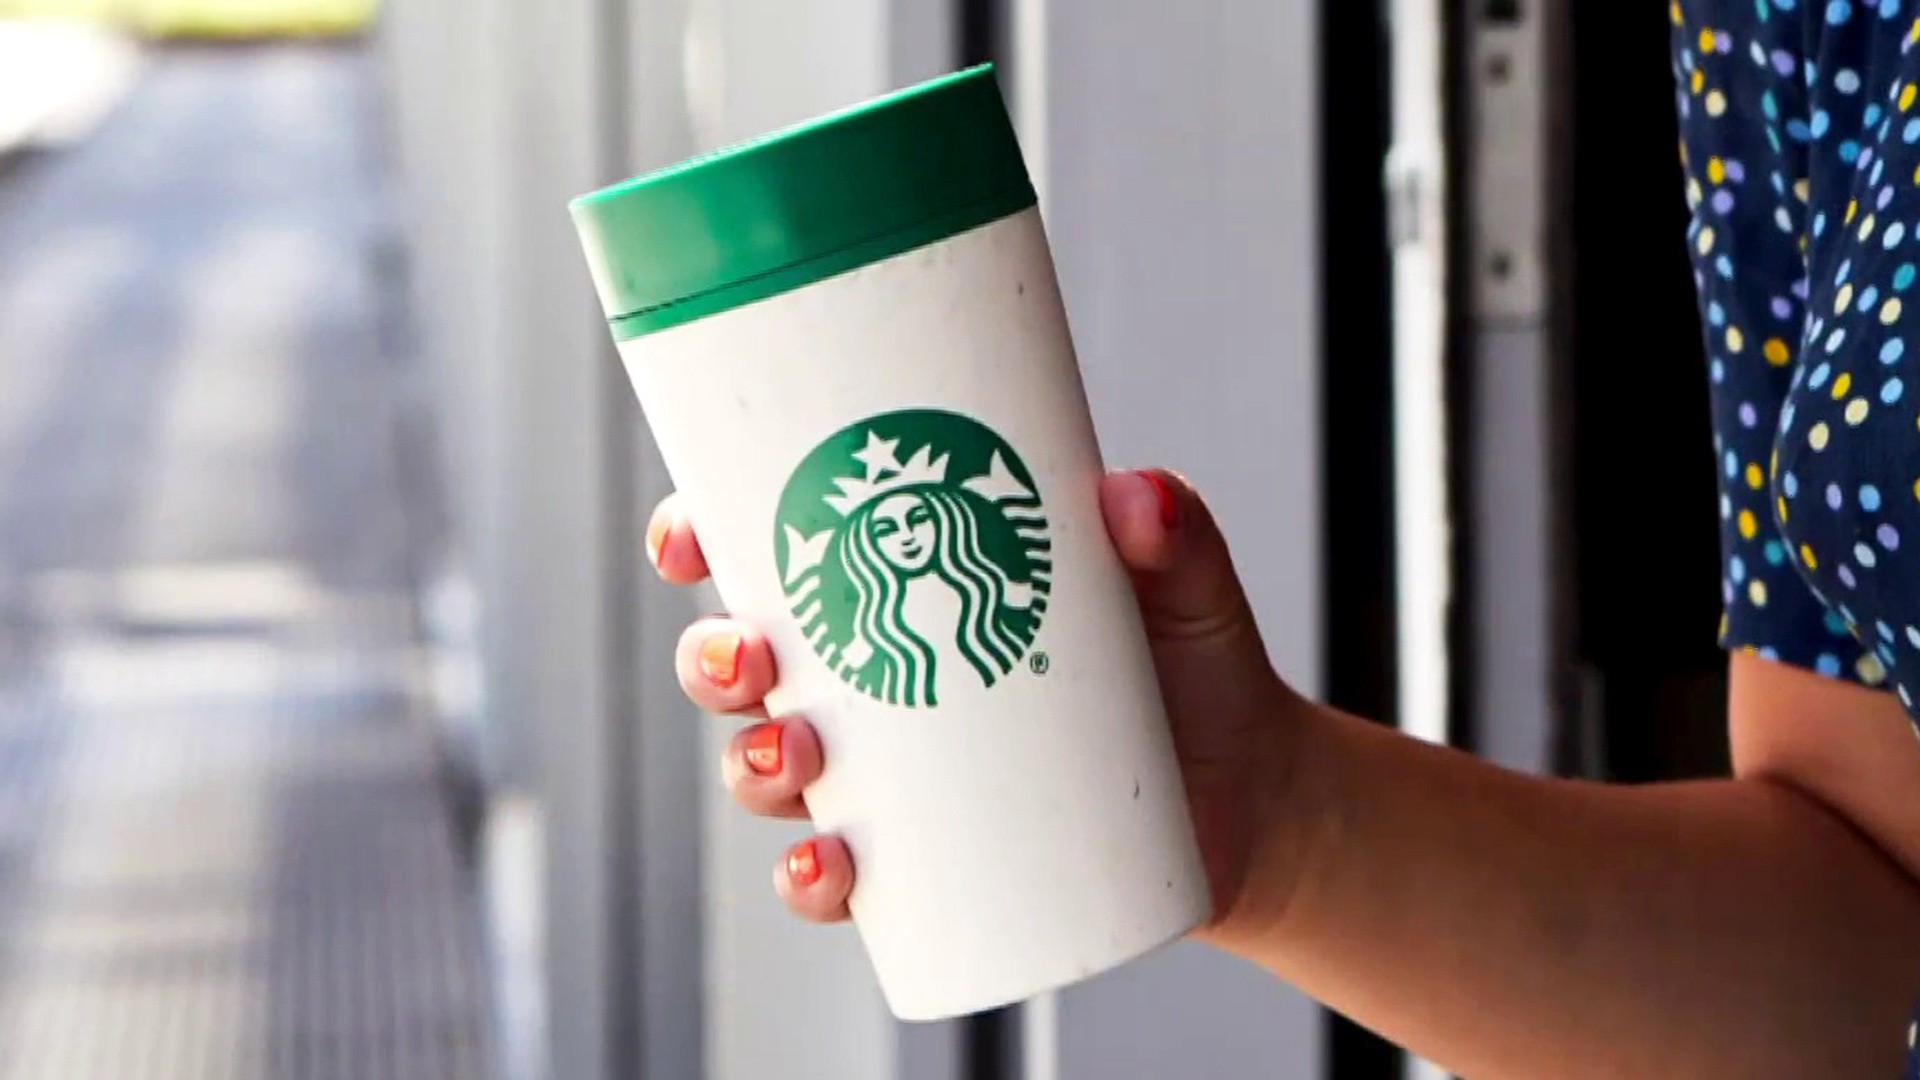 Inside the Starbucks reusable cup programme, Article